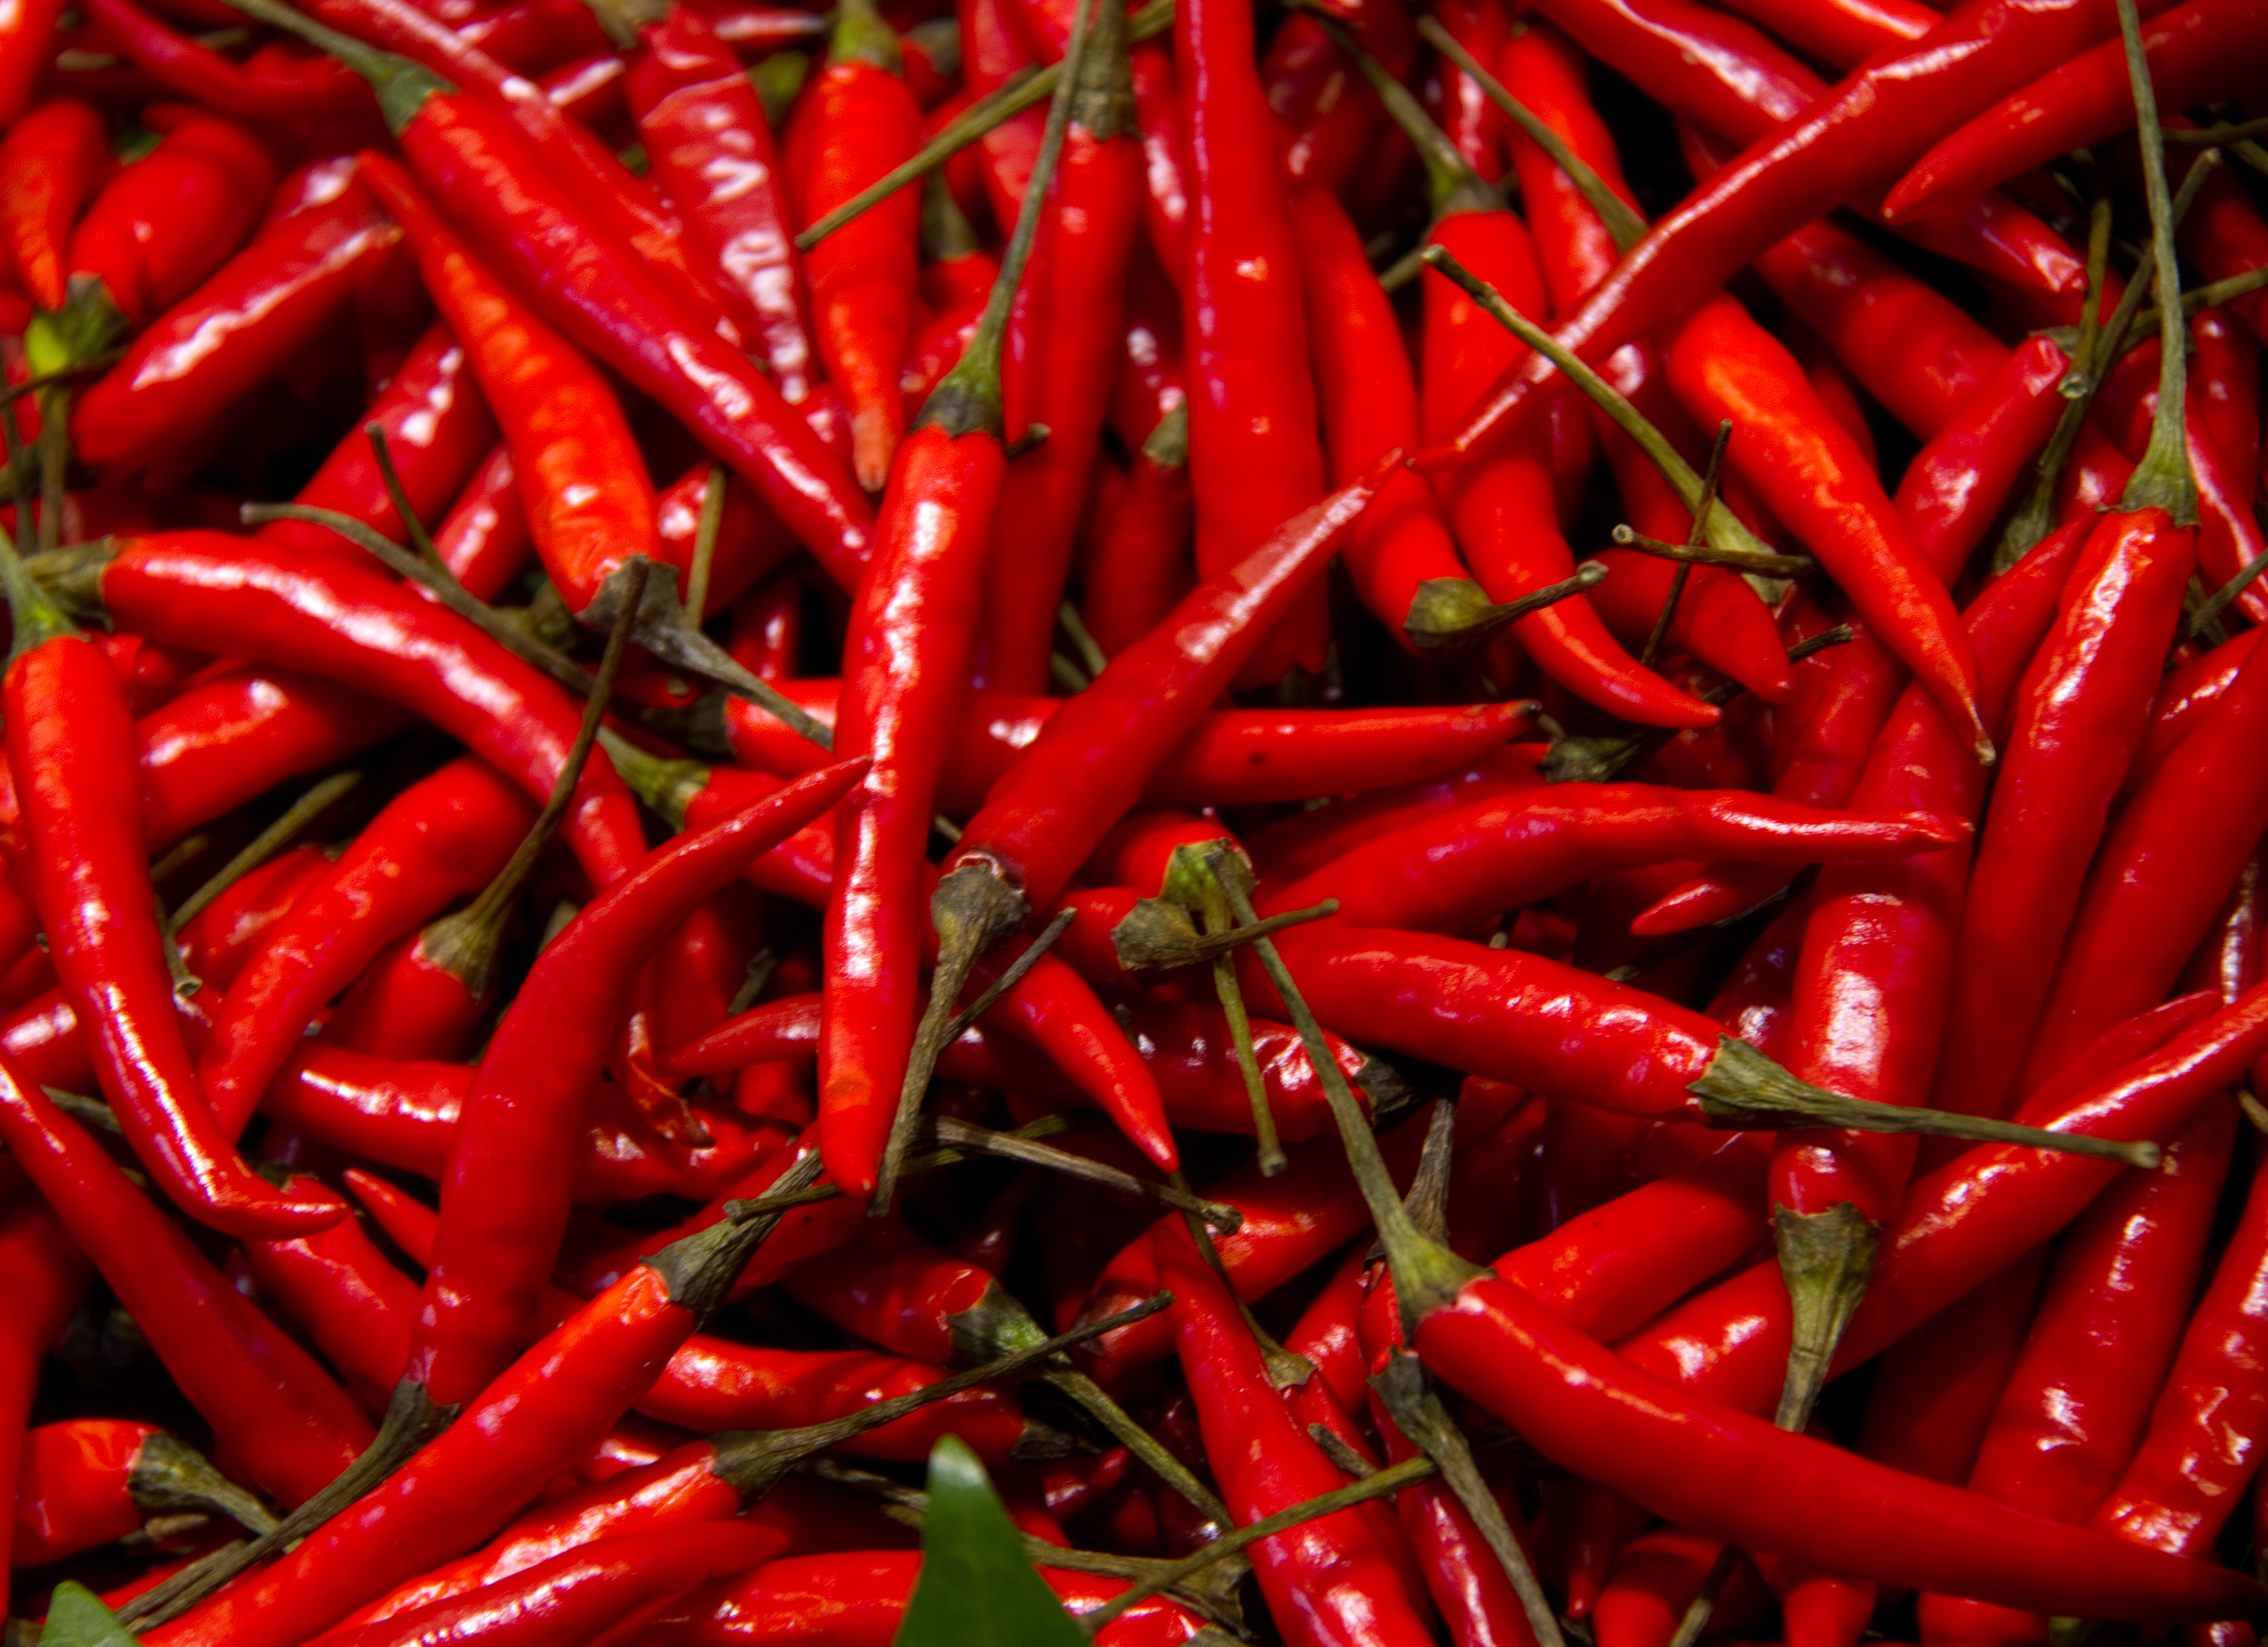 File:Red Chillies (5836682235).jpg - Wikimedia Commons